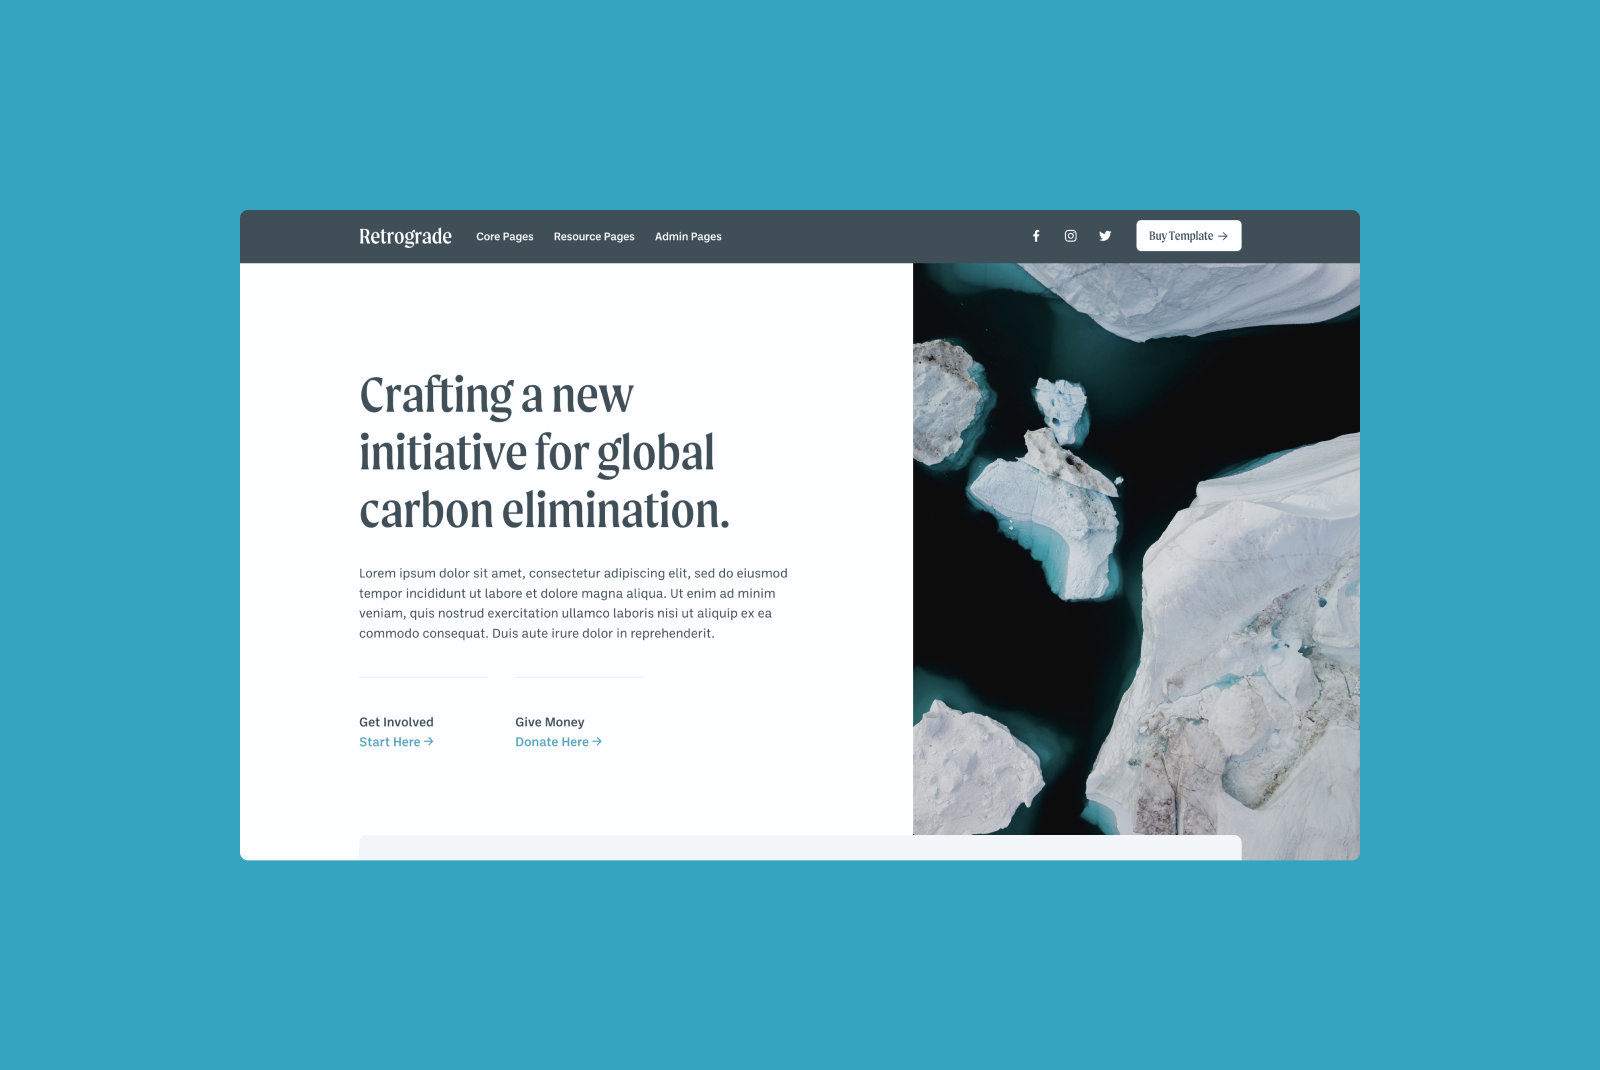 Website template screenshot featuring a modern design with top navigation, icebergs background image, and call-to-action buttons, ideal for environmental initiatives.